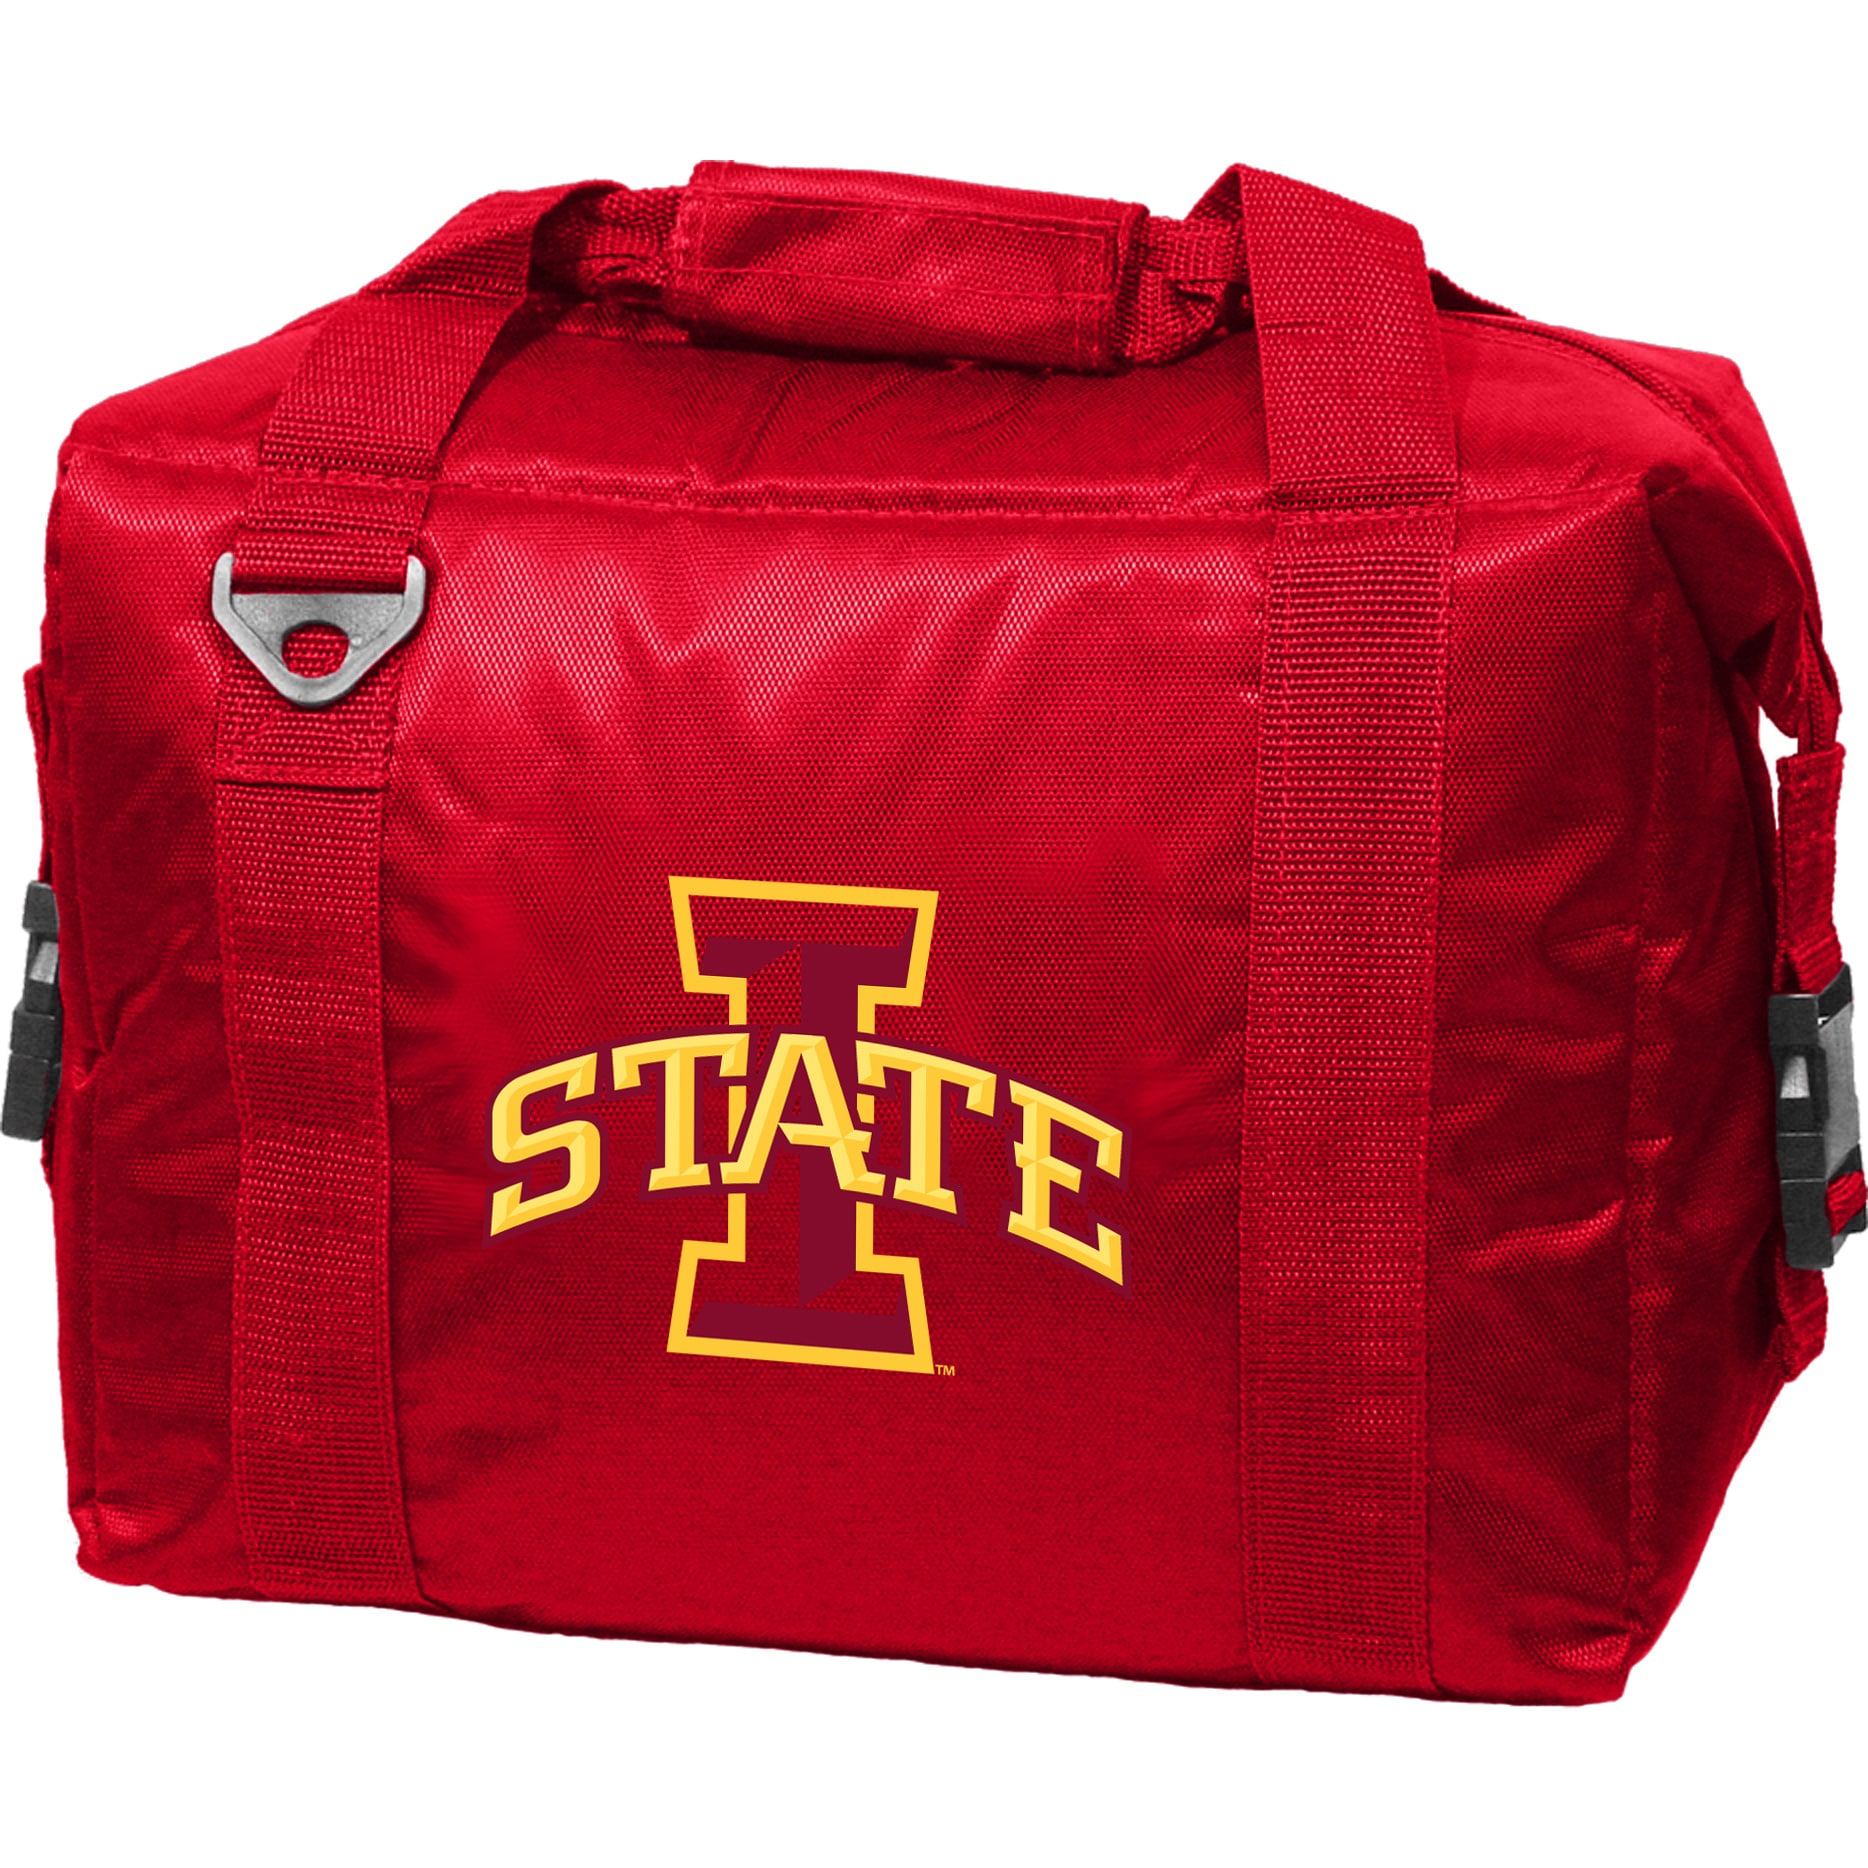 Iowa State Cyclones 12-pack Cooler